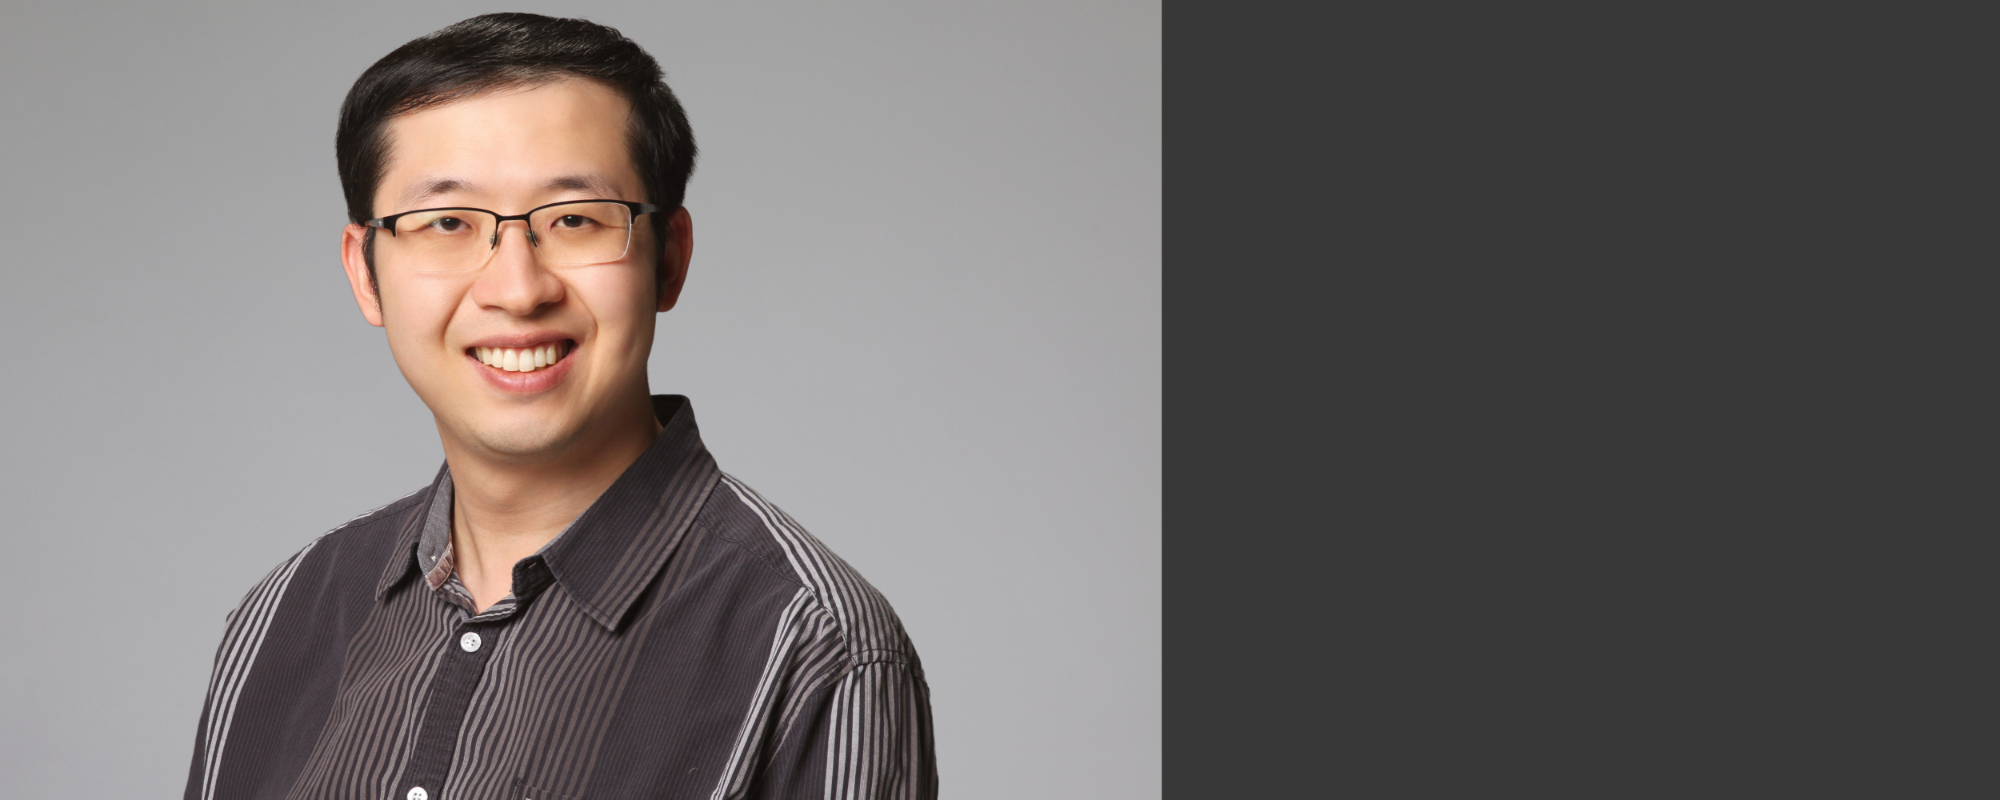 COMPUTING SCIENCE RESEARCHER KE LI RECEIVES $200,000 FROM BC KNOWLEDGE DEVELOPMENT FUND